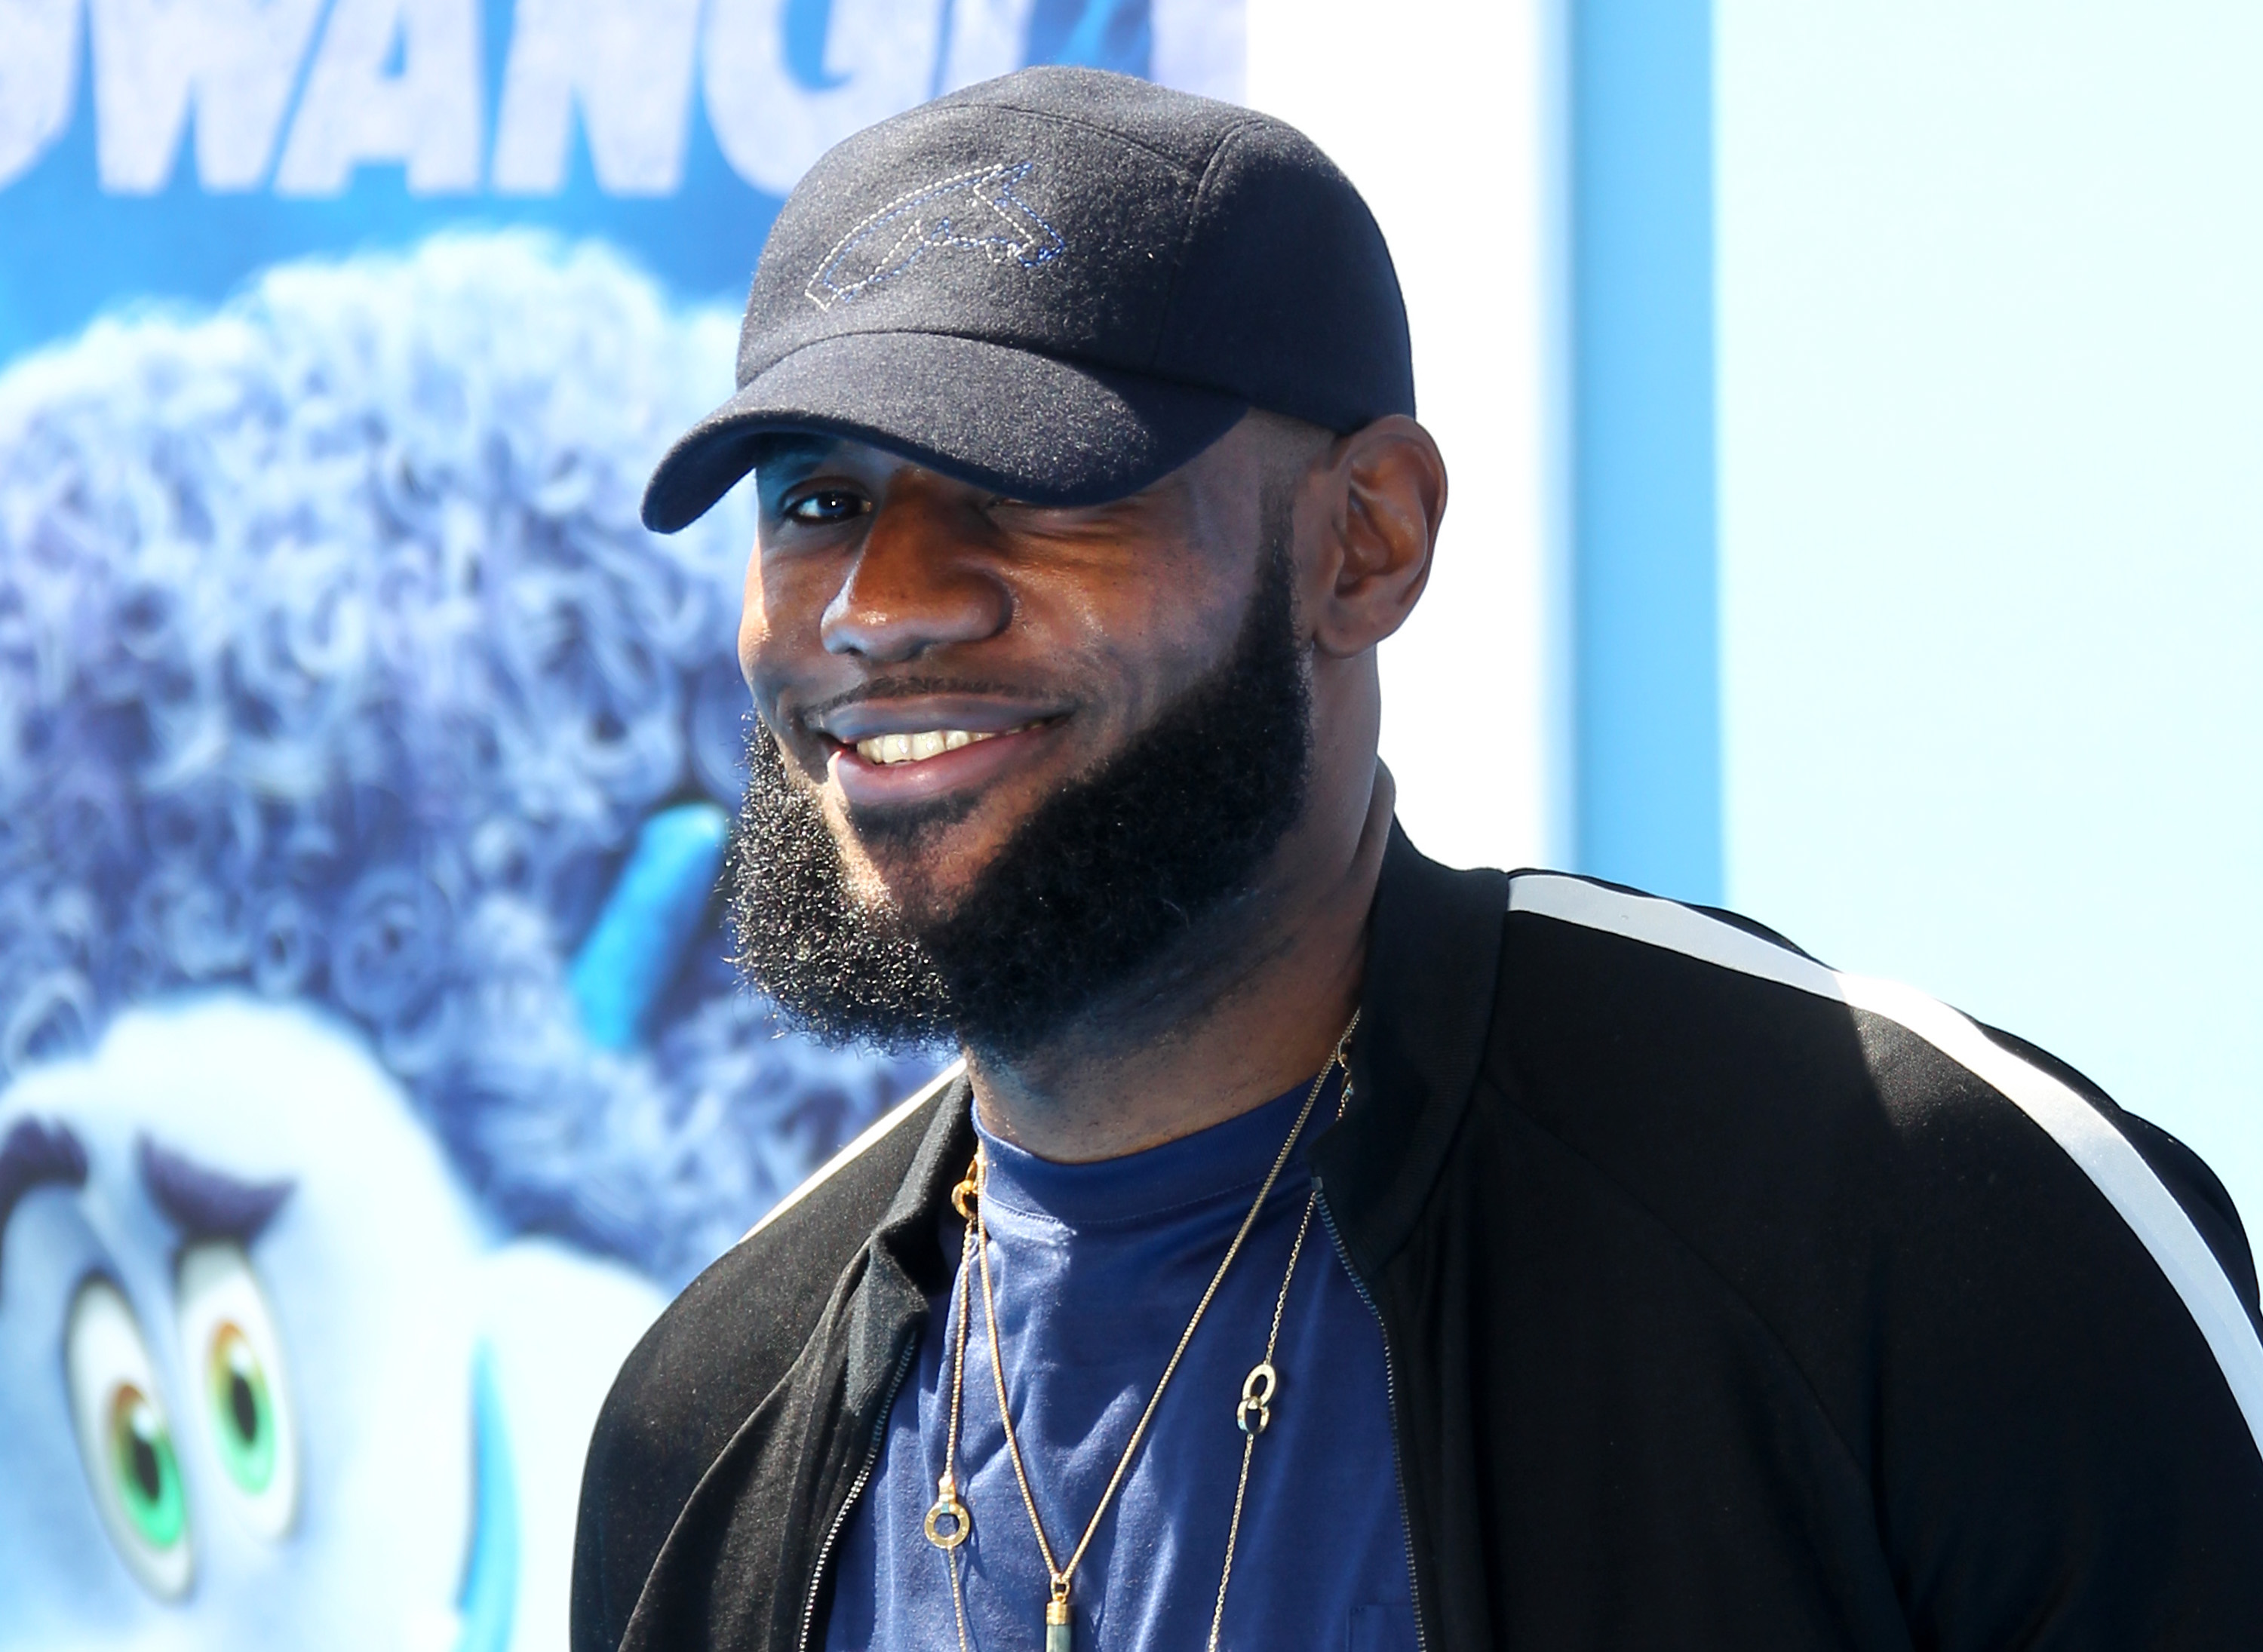 LeBron James To Open Transitional Housing For I Promise Students +